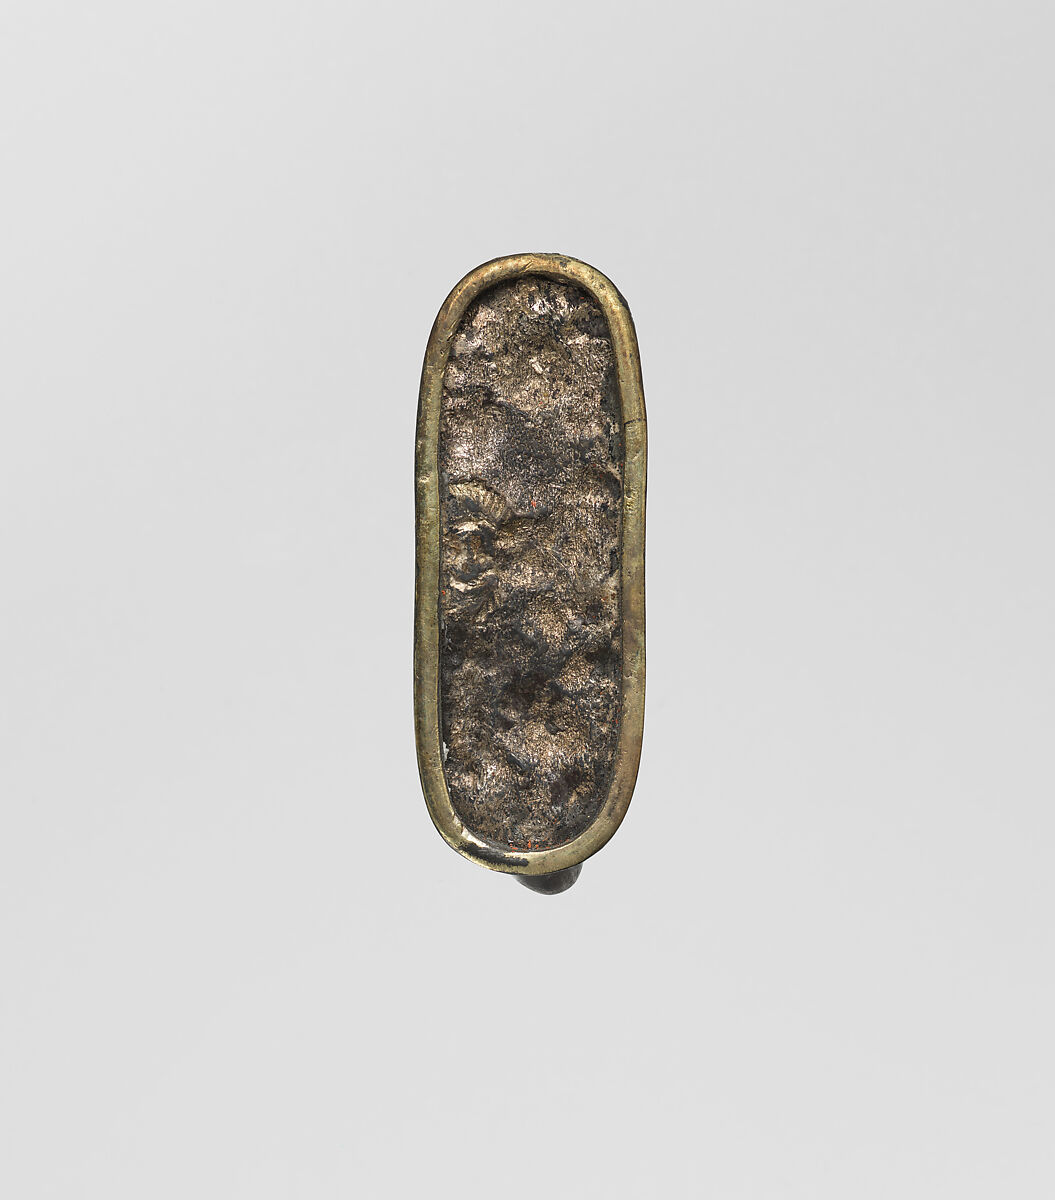 Ring, Bronze or copper alloy 